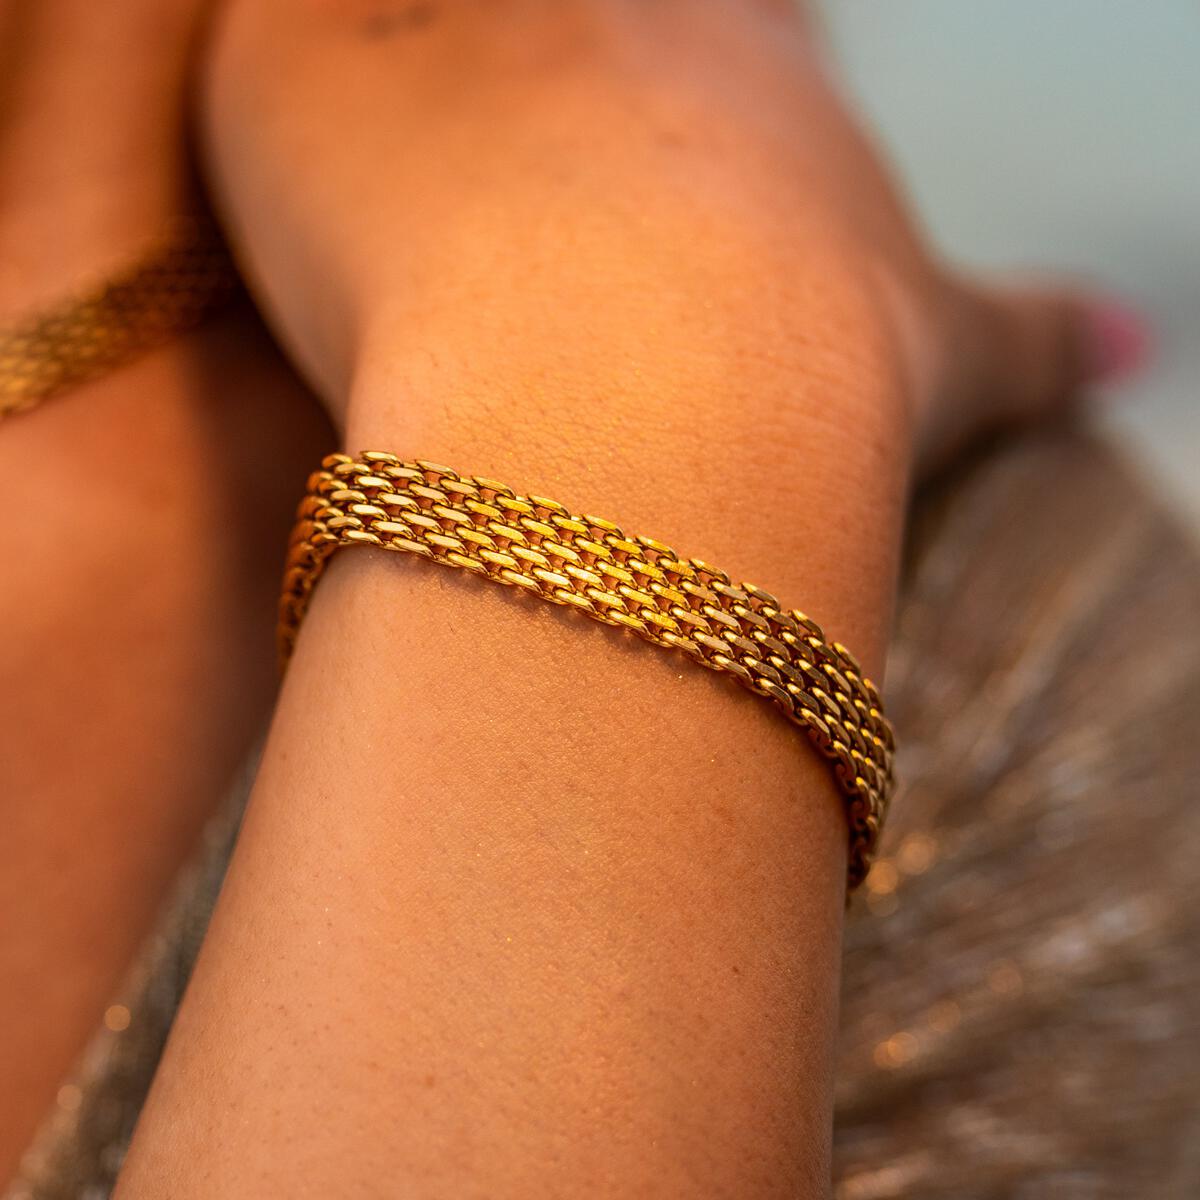 Radiance Gold plated Bracelet. By ALCO.